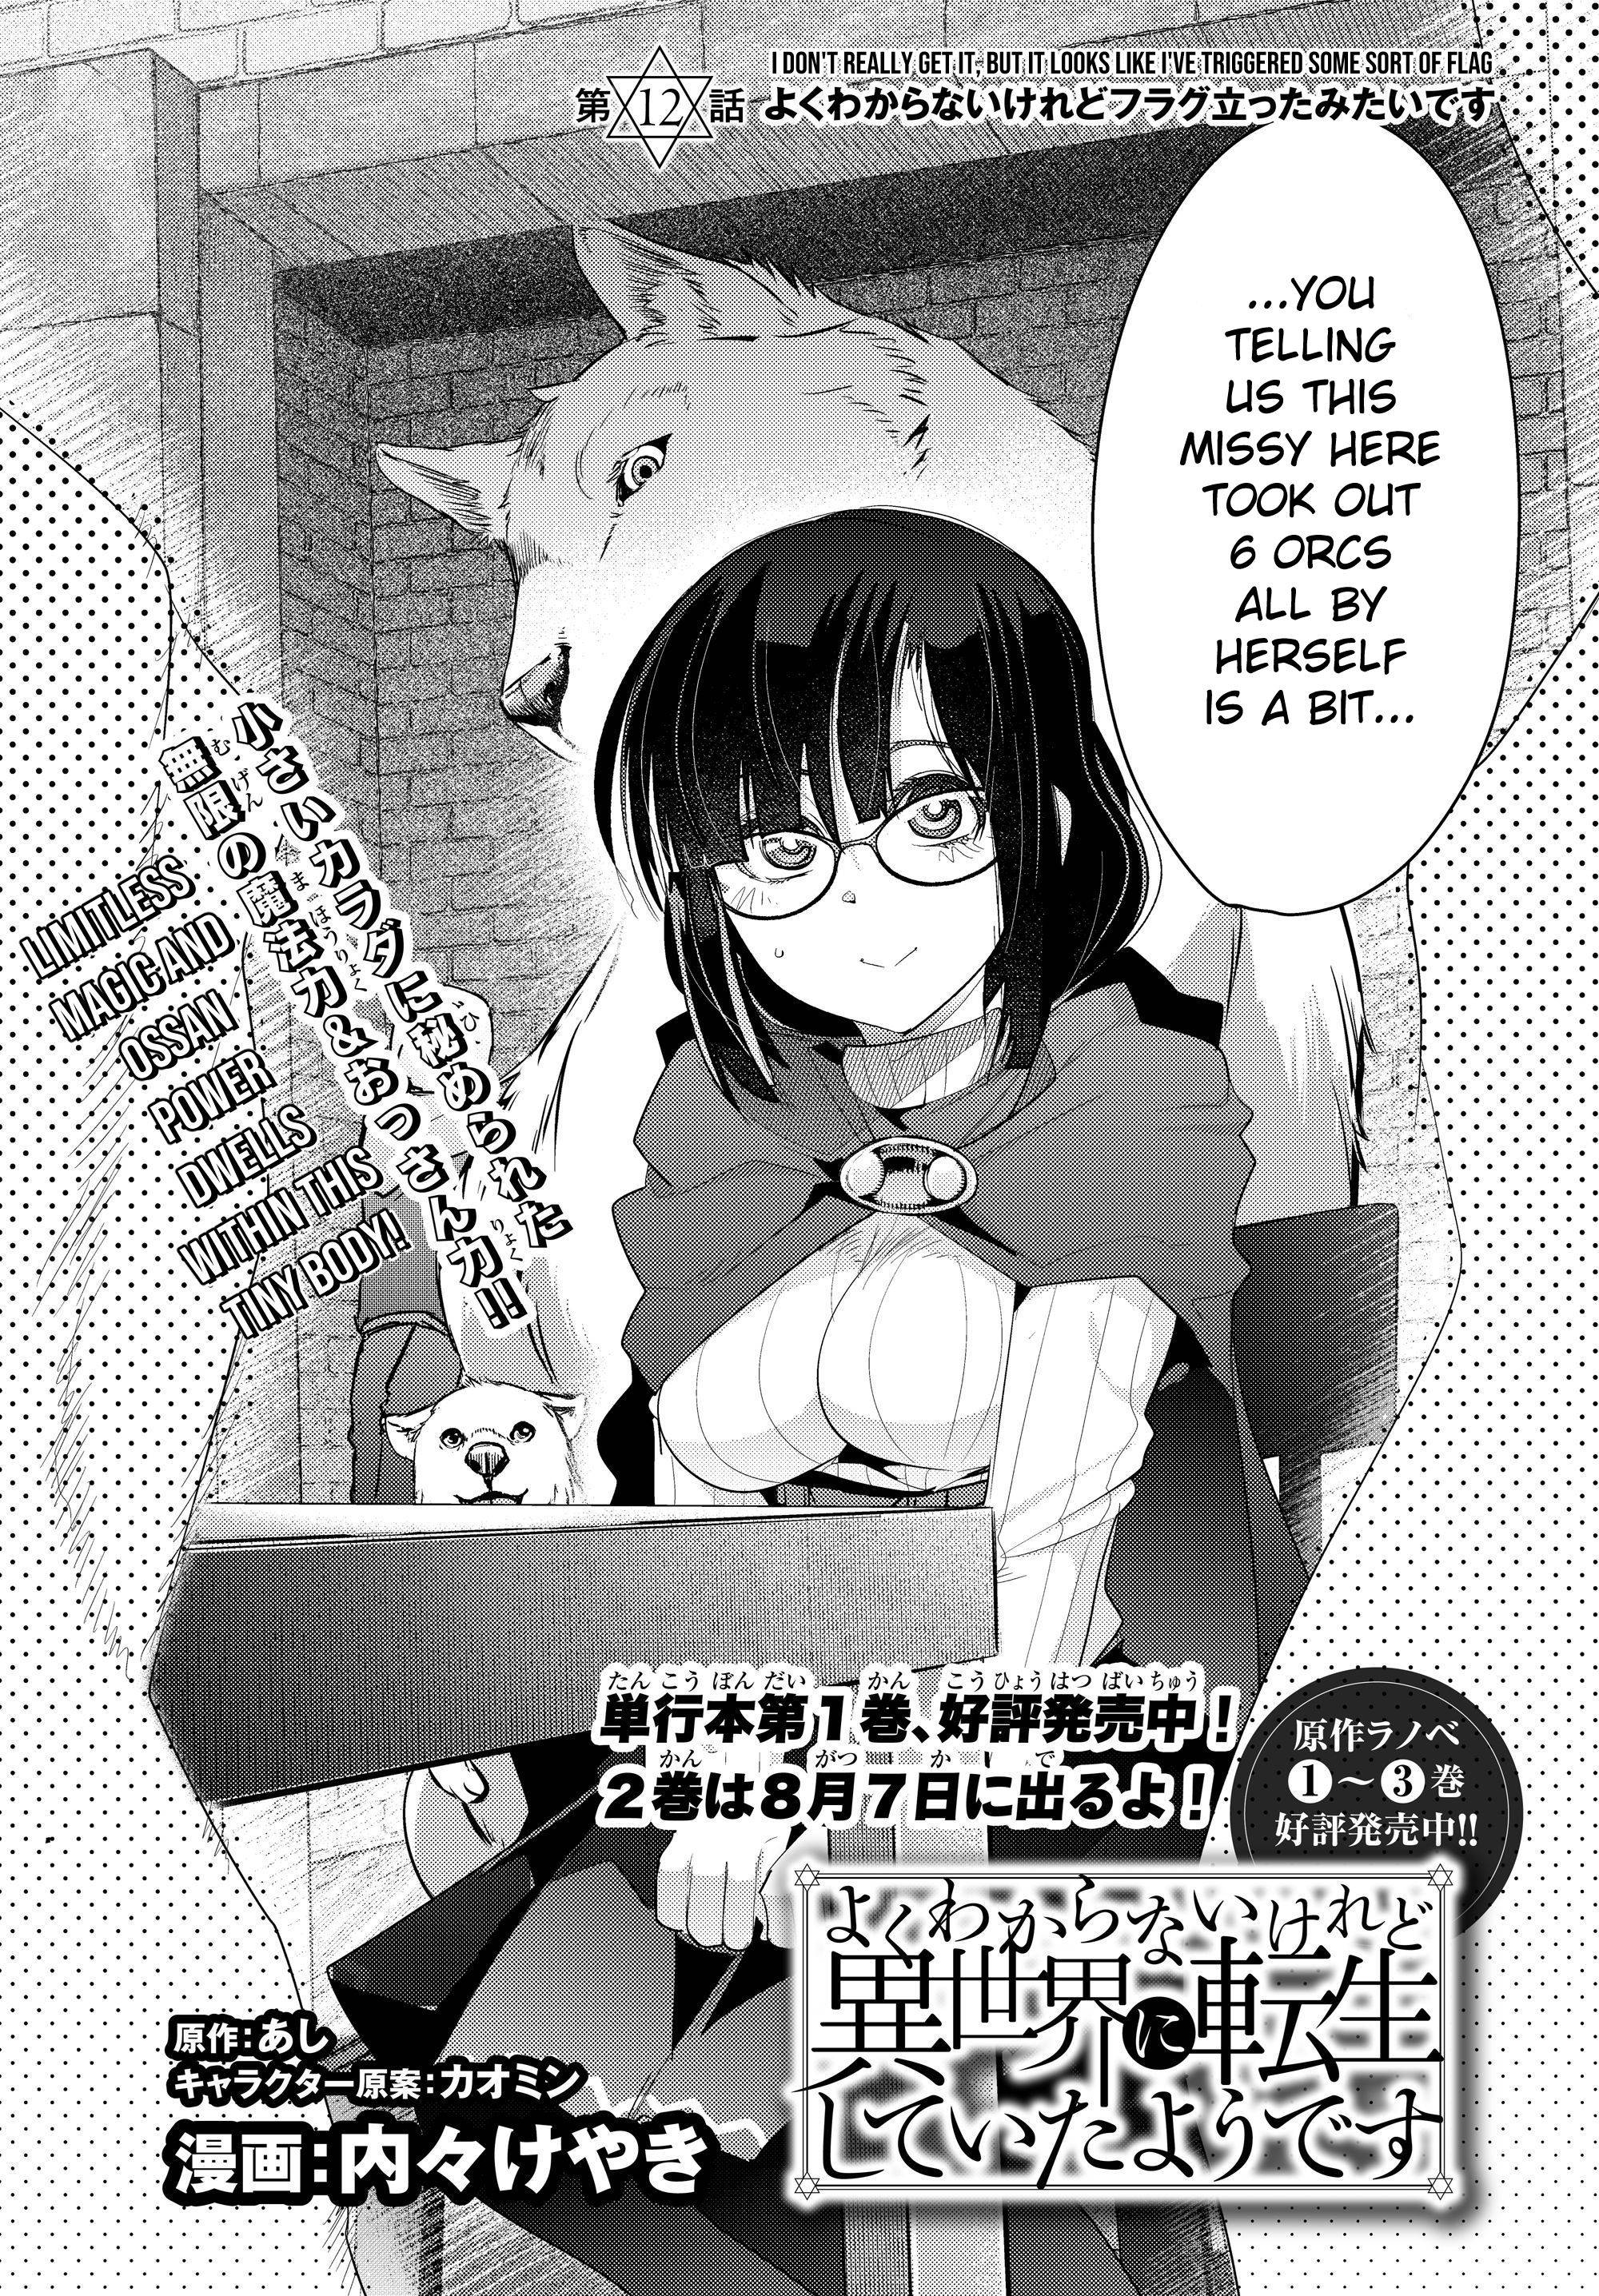 Read I Don't Really Get It, but It Looks Like I Was Reincarnated in Another  World Manga Chapter 3.1 in English Free Online